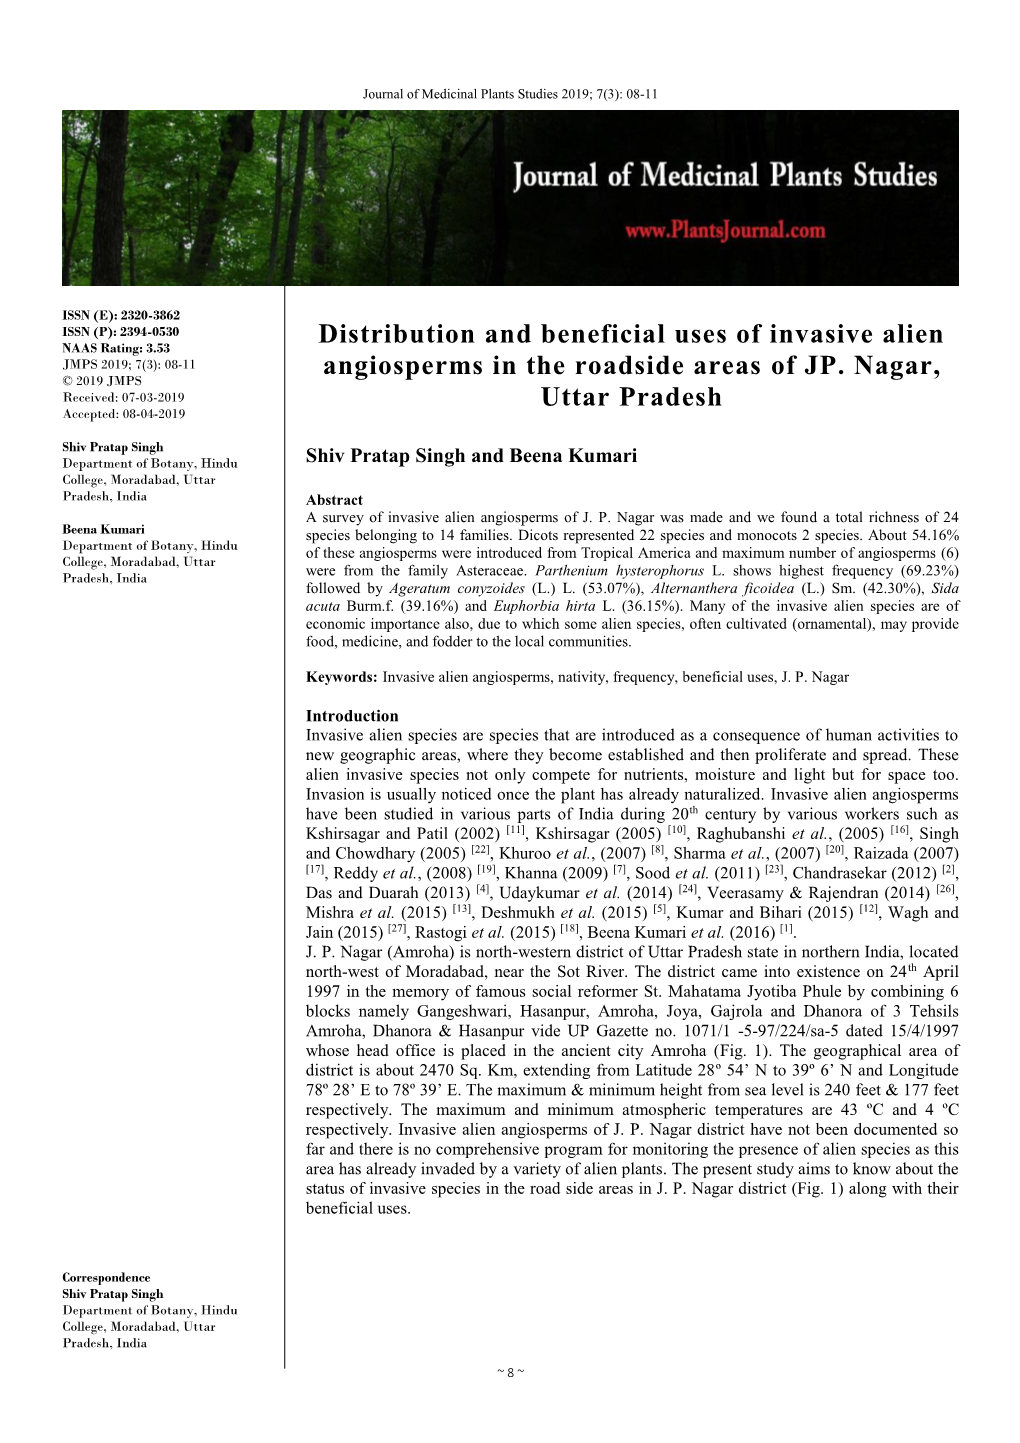 Distribution and Beneficial Uses of Invasive Alien Angiosperms in The